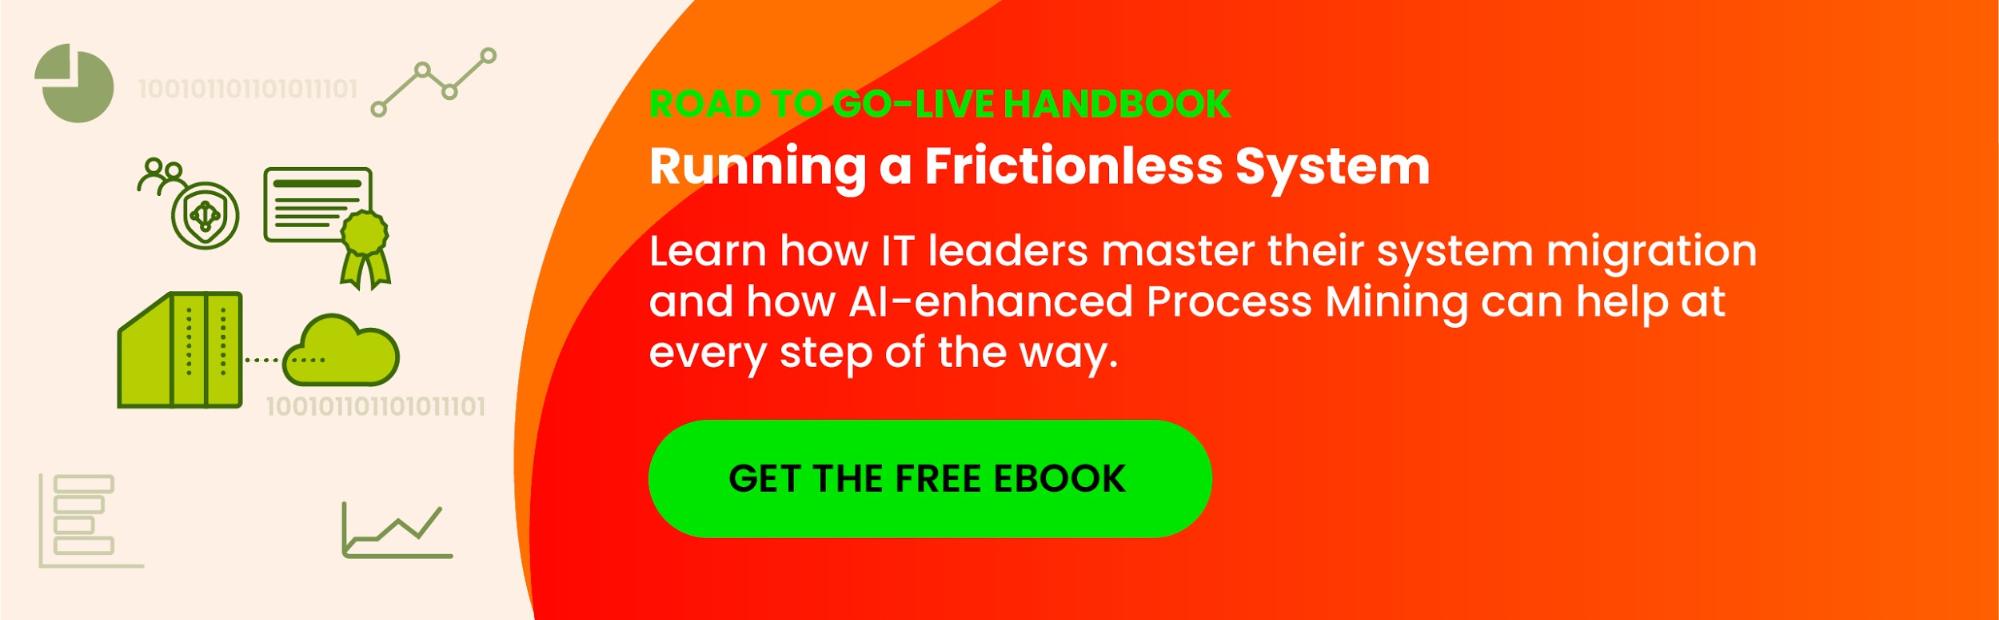 Celonis - The Road to Go-Live Handbook: Running a Frictionless System Migration